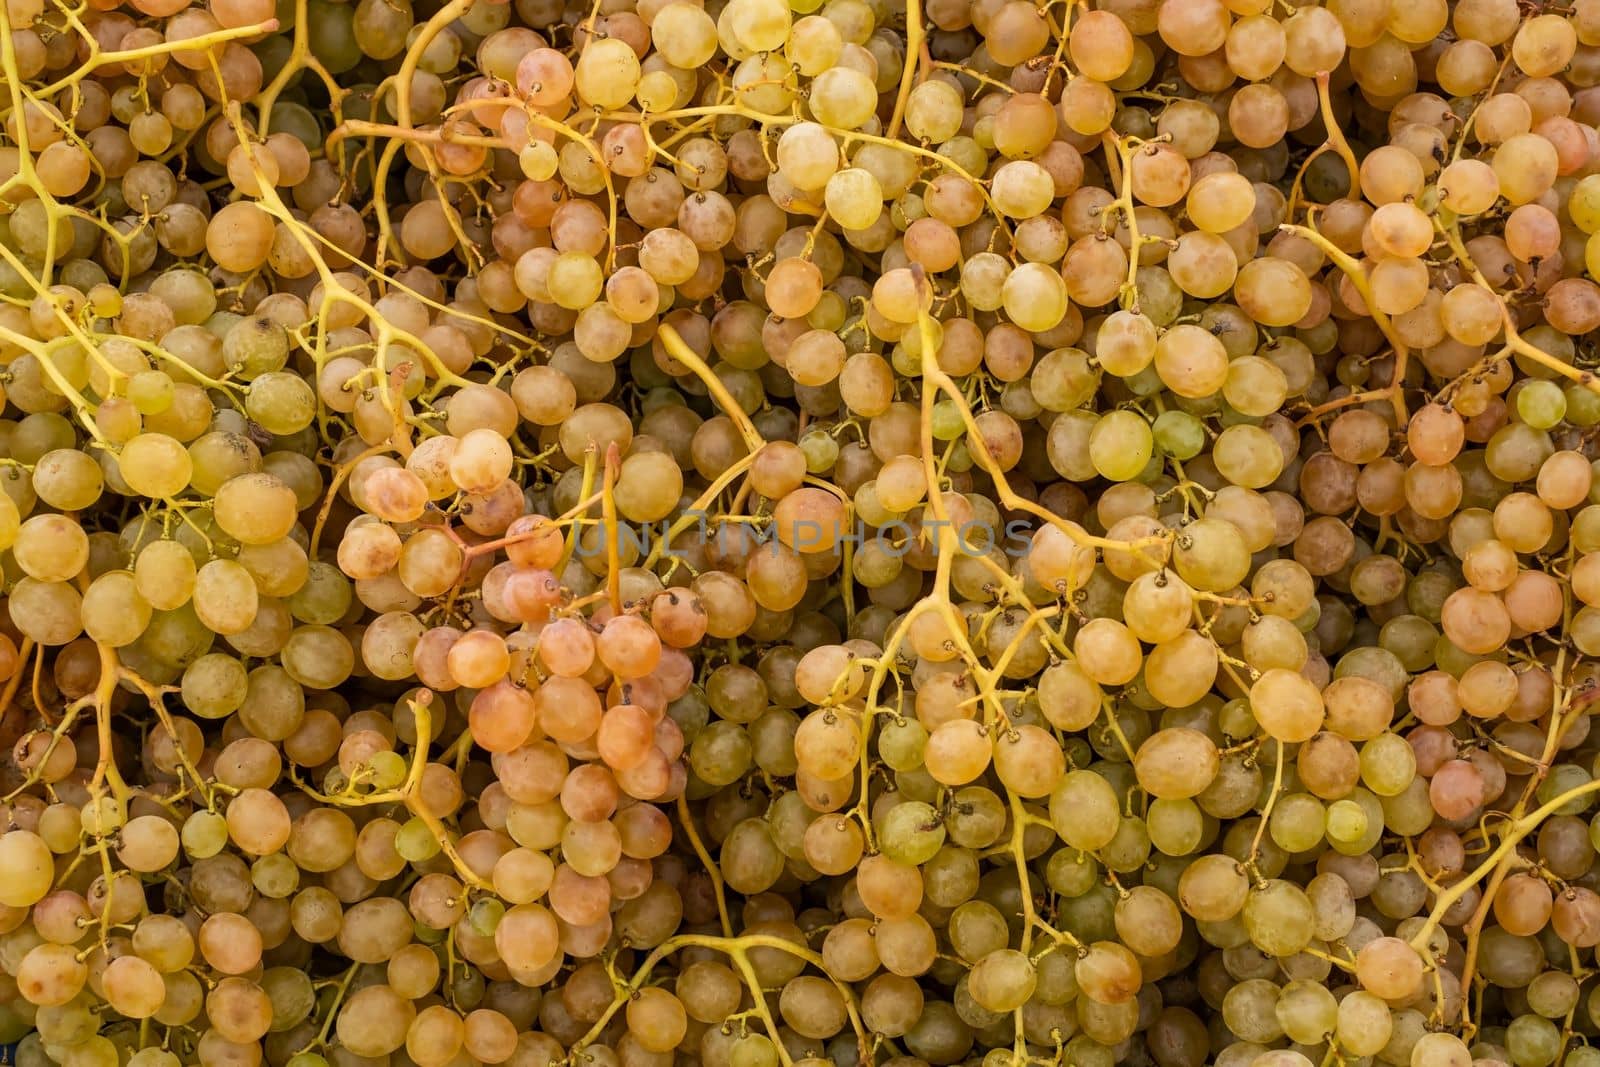  Grape in the bazaar sall. sale, shopping and eco food concept.  by koldunov